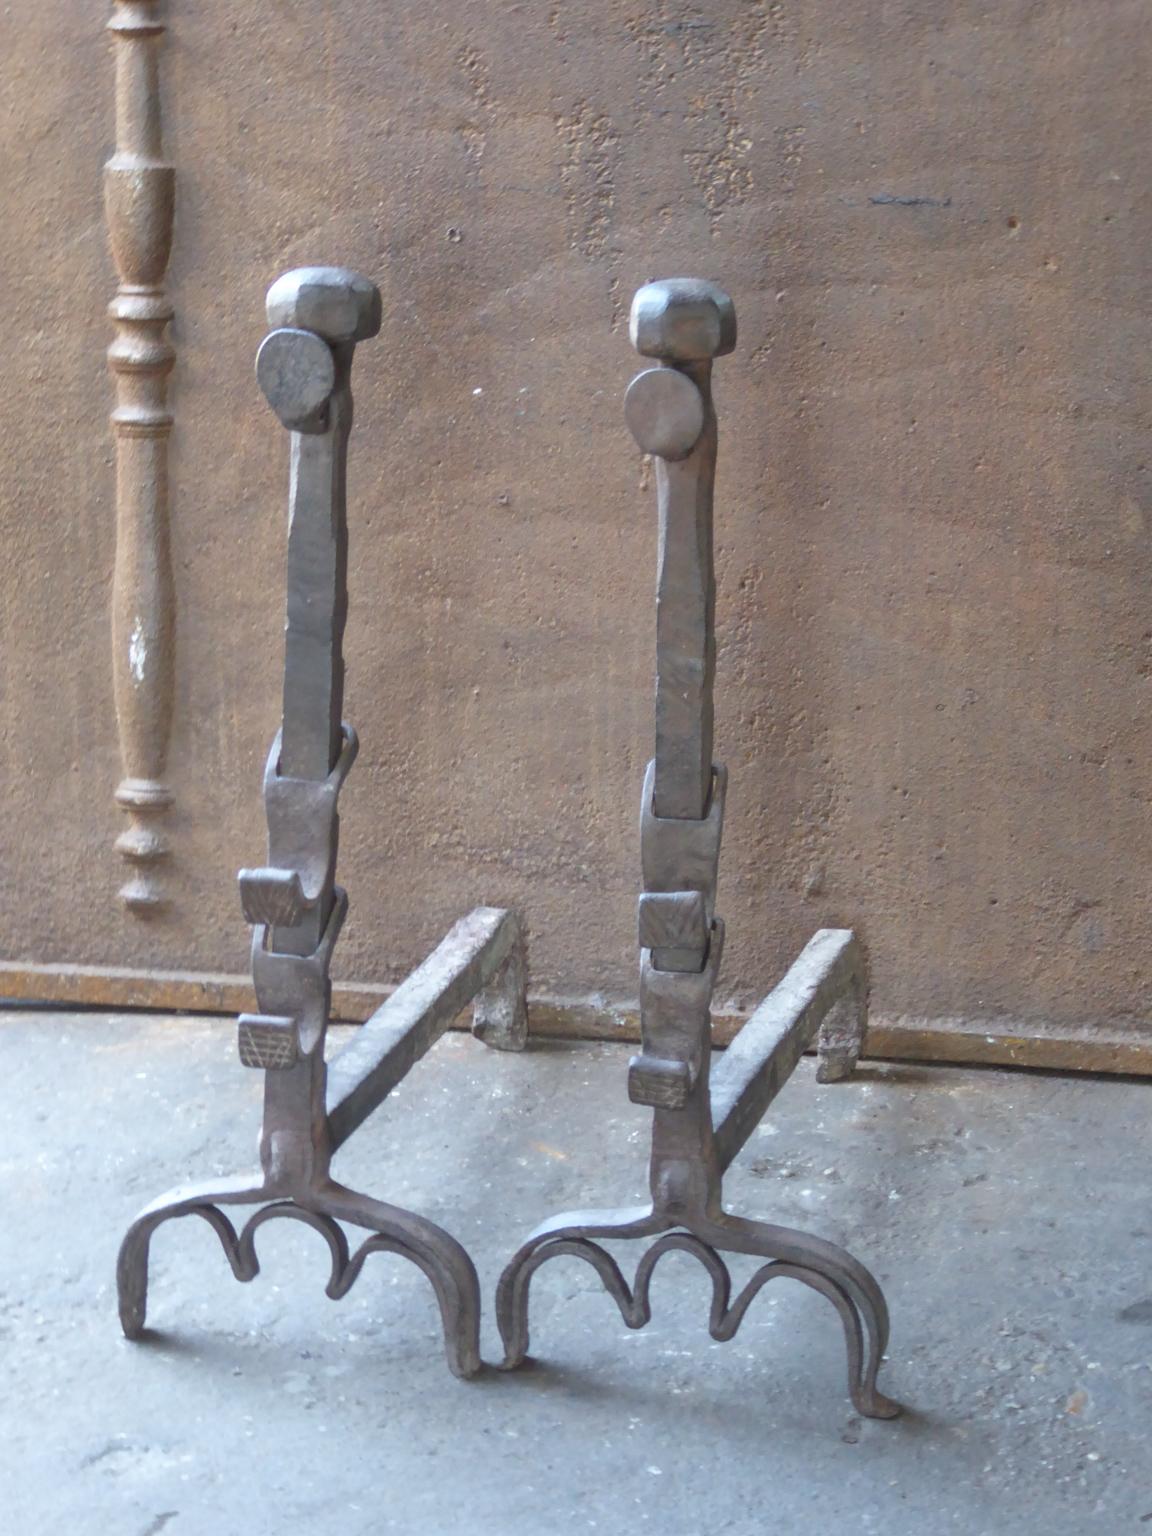 17th century French andirons made of wrought iron. The style of the andirons is Louis XIII and they are from that period. They have a natural brown patina, which can be made black / pewter upon request. The andirons have spit hooks to grill food.